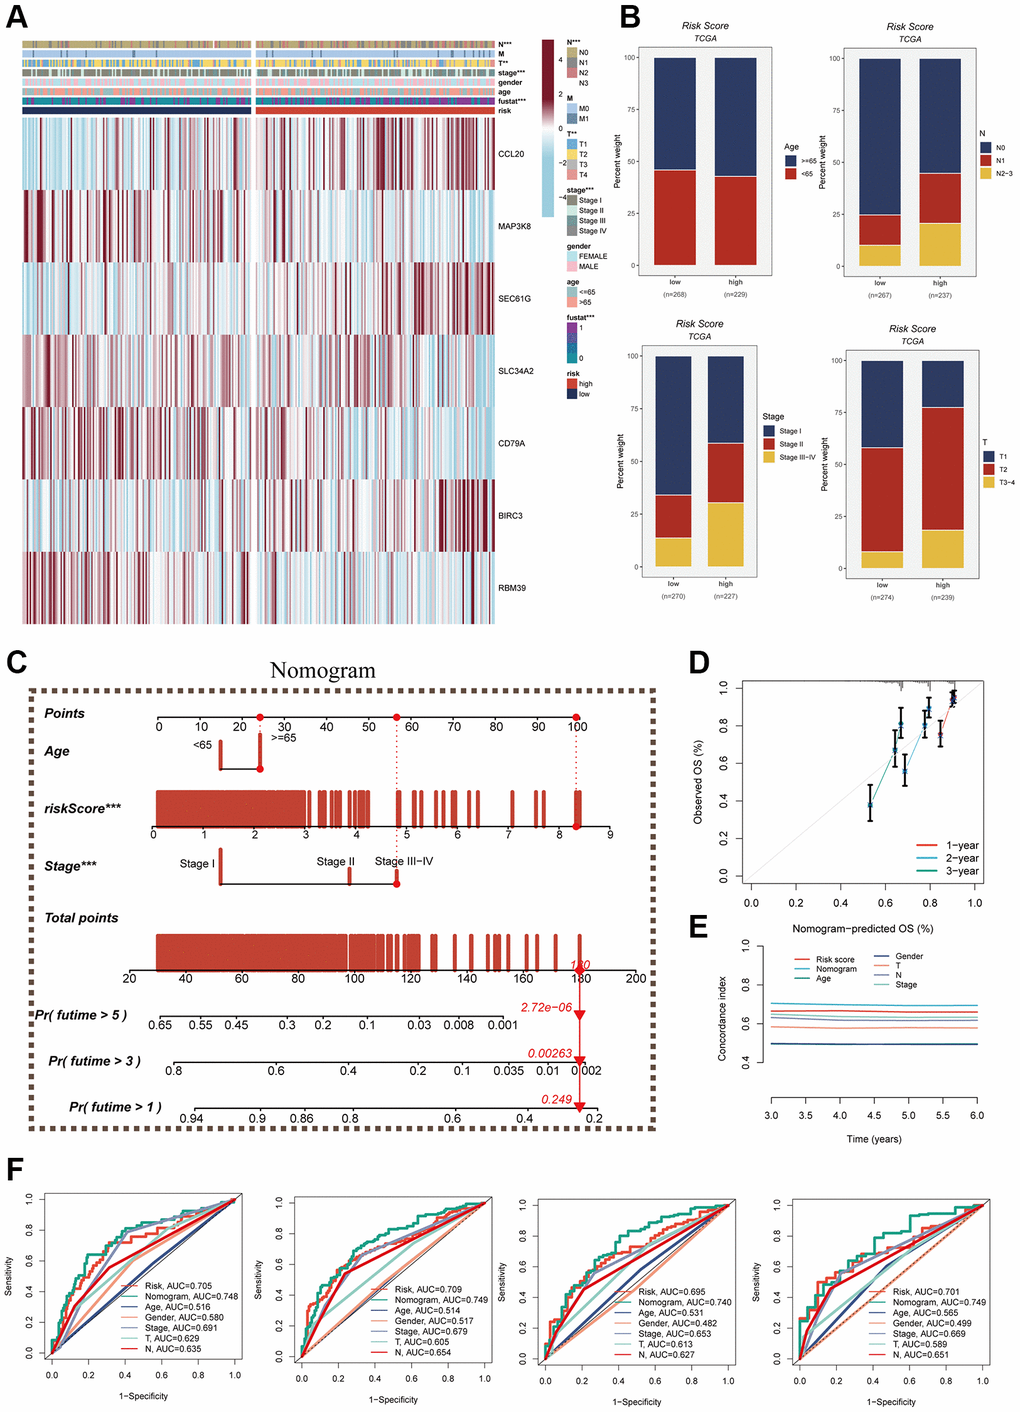 Clinical correlation analysis and construction of nomogram. (A) Heat map was constructed by combining clinical features and model gene expression to demonstrate the distribution of clinical features and model genes in high- and low-risk groups. (B) Bar graphs showing the proportion of T-stage, N-stage, fustat, and clinical stage in the high- and low-risk groups. (C) A nomogram was constructed by combining age, risk score and clinical stage. (D) Concordance index curves. (E) Decision curve. (F) ROC curves showing AUC values for clinical characteristics, risk scores and nomogram scores at 1-, 3-, 5-, and 7-years, respectively.